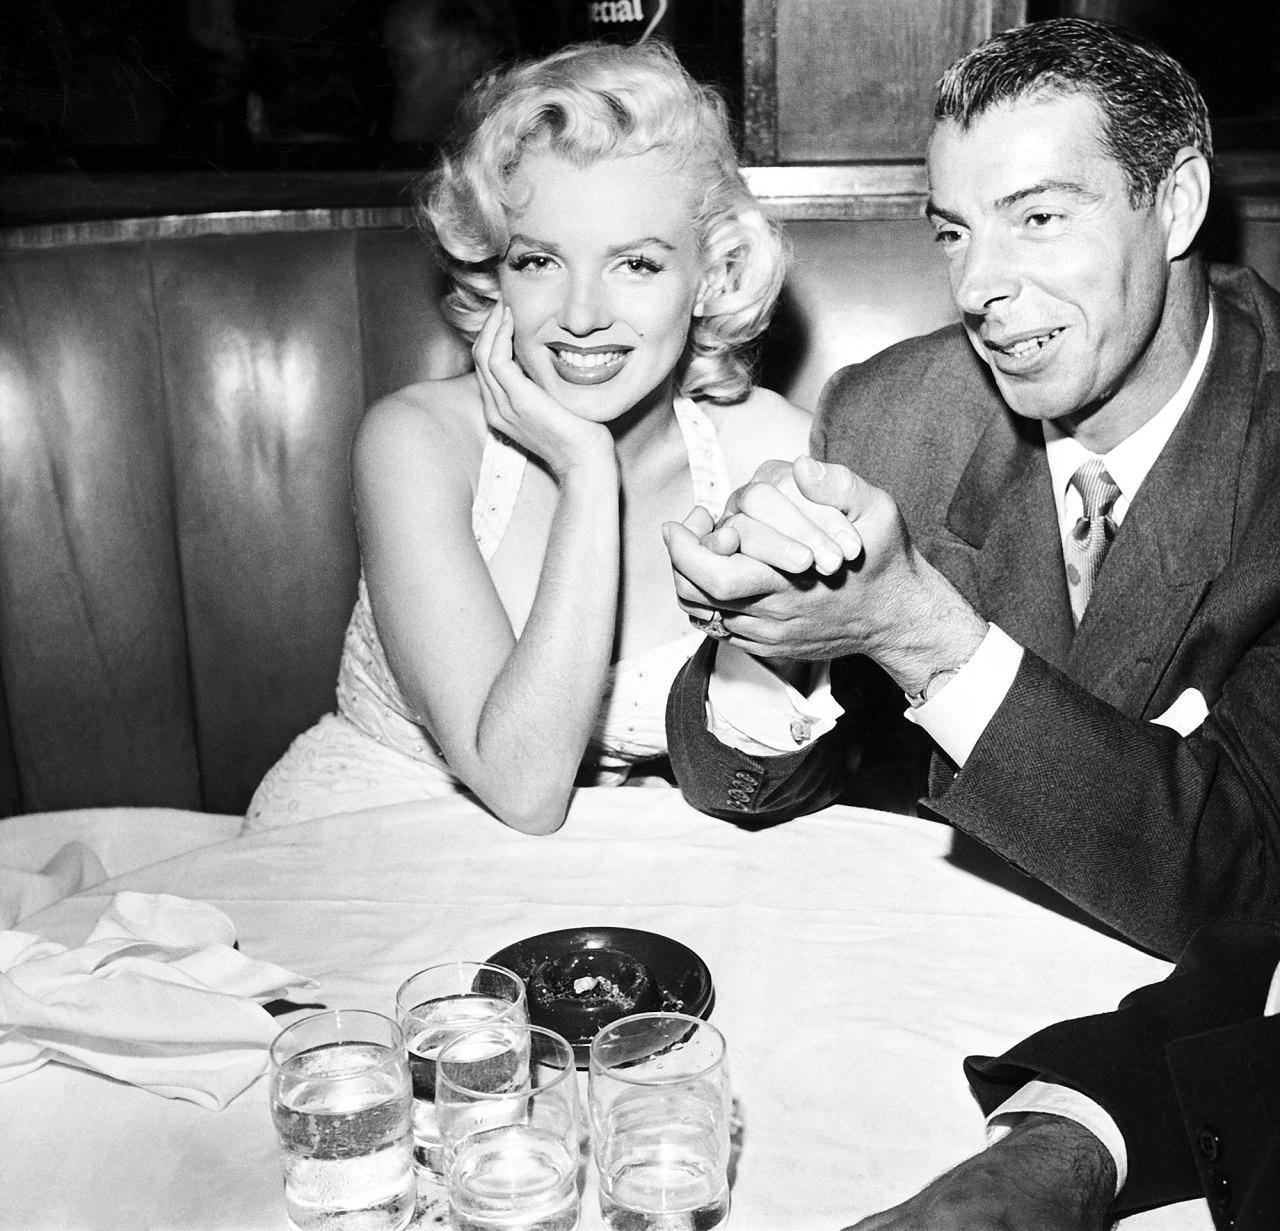 Marilyn Monroe and Joe DiMaggio on a date at Chasen’s Restaurant in Los Angeles, California on June 26, 1953.jpeg